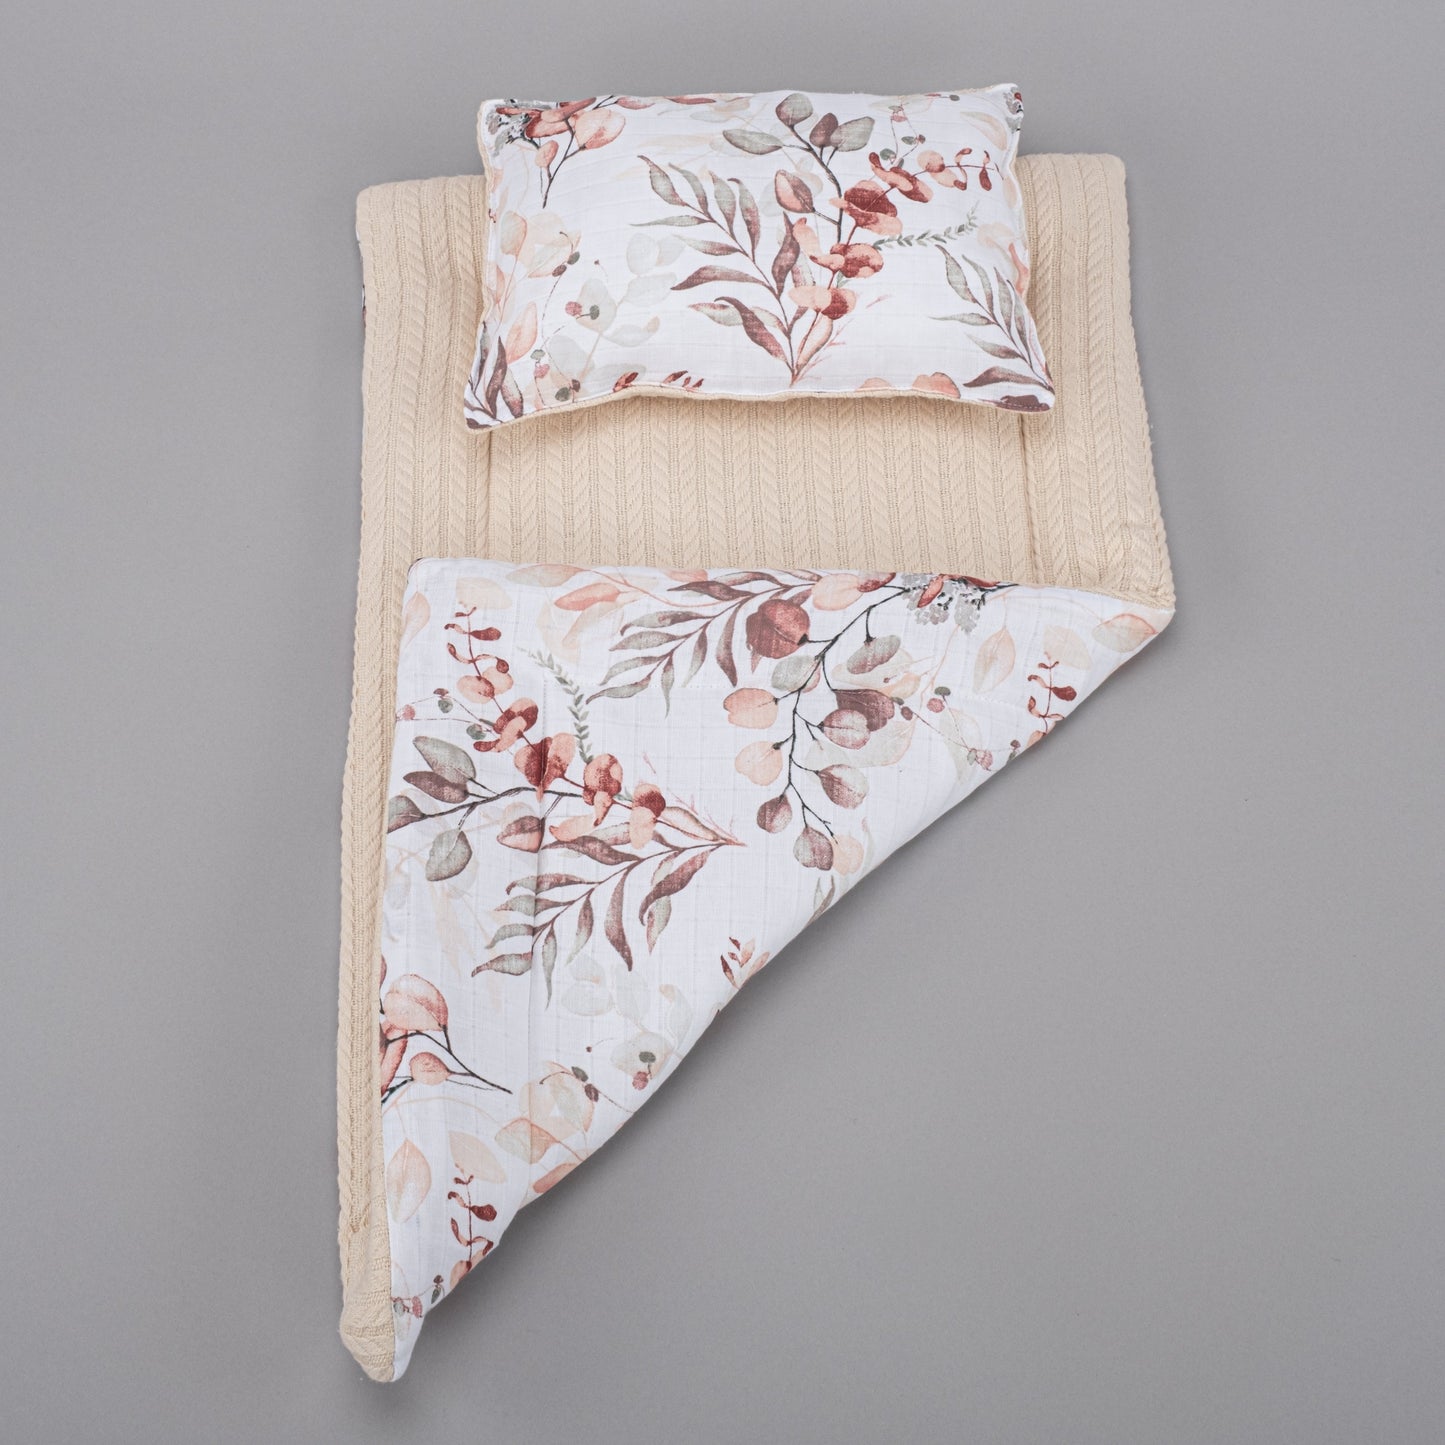 Double Side Changing Pad - Coffee with Milk Knitting - Autumn Leaves